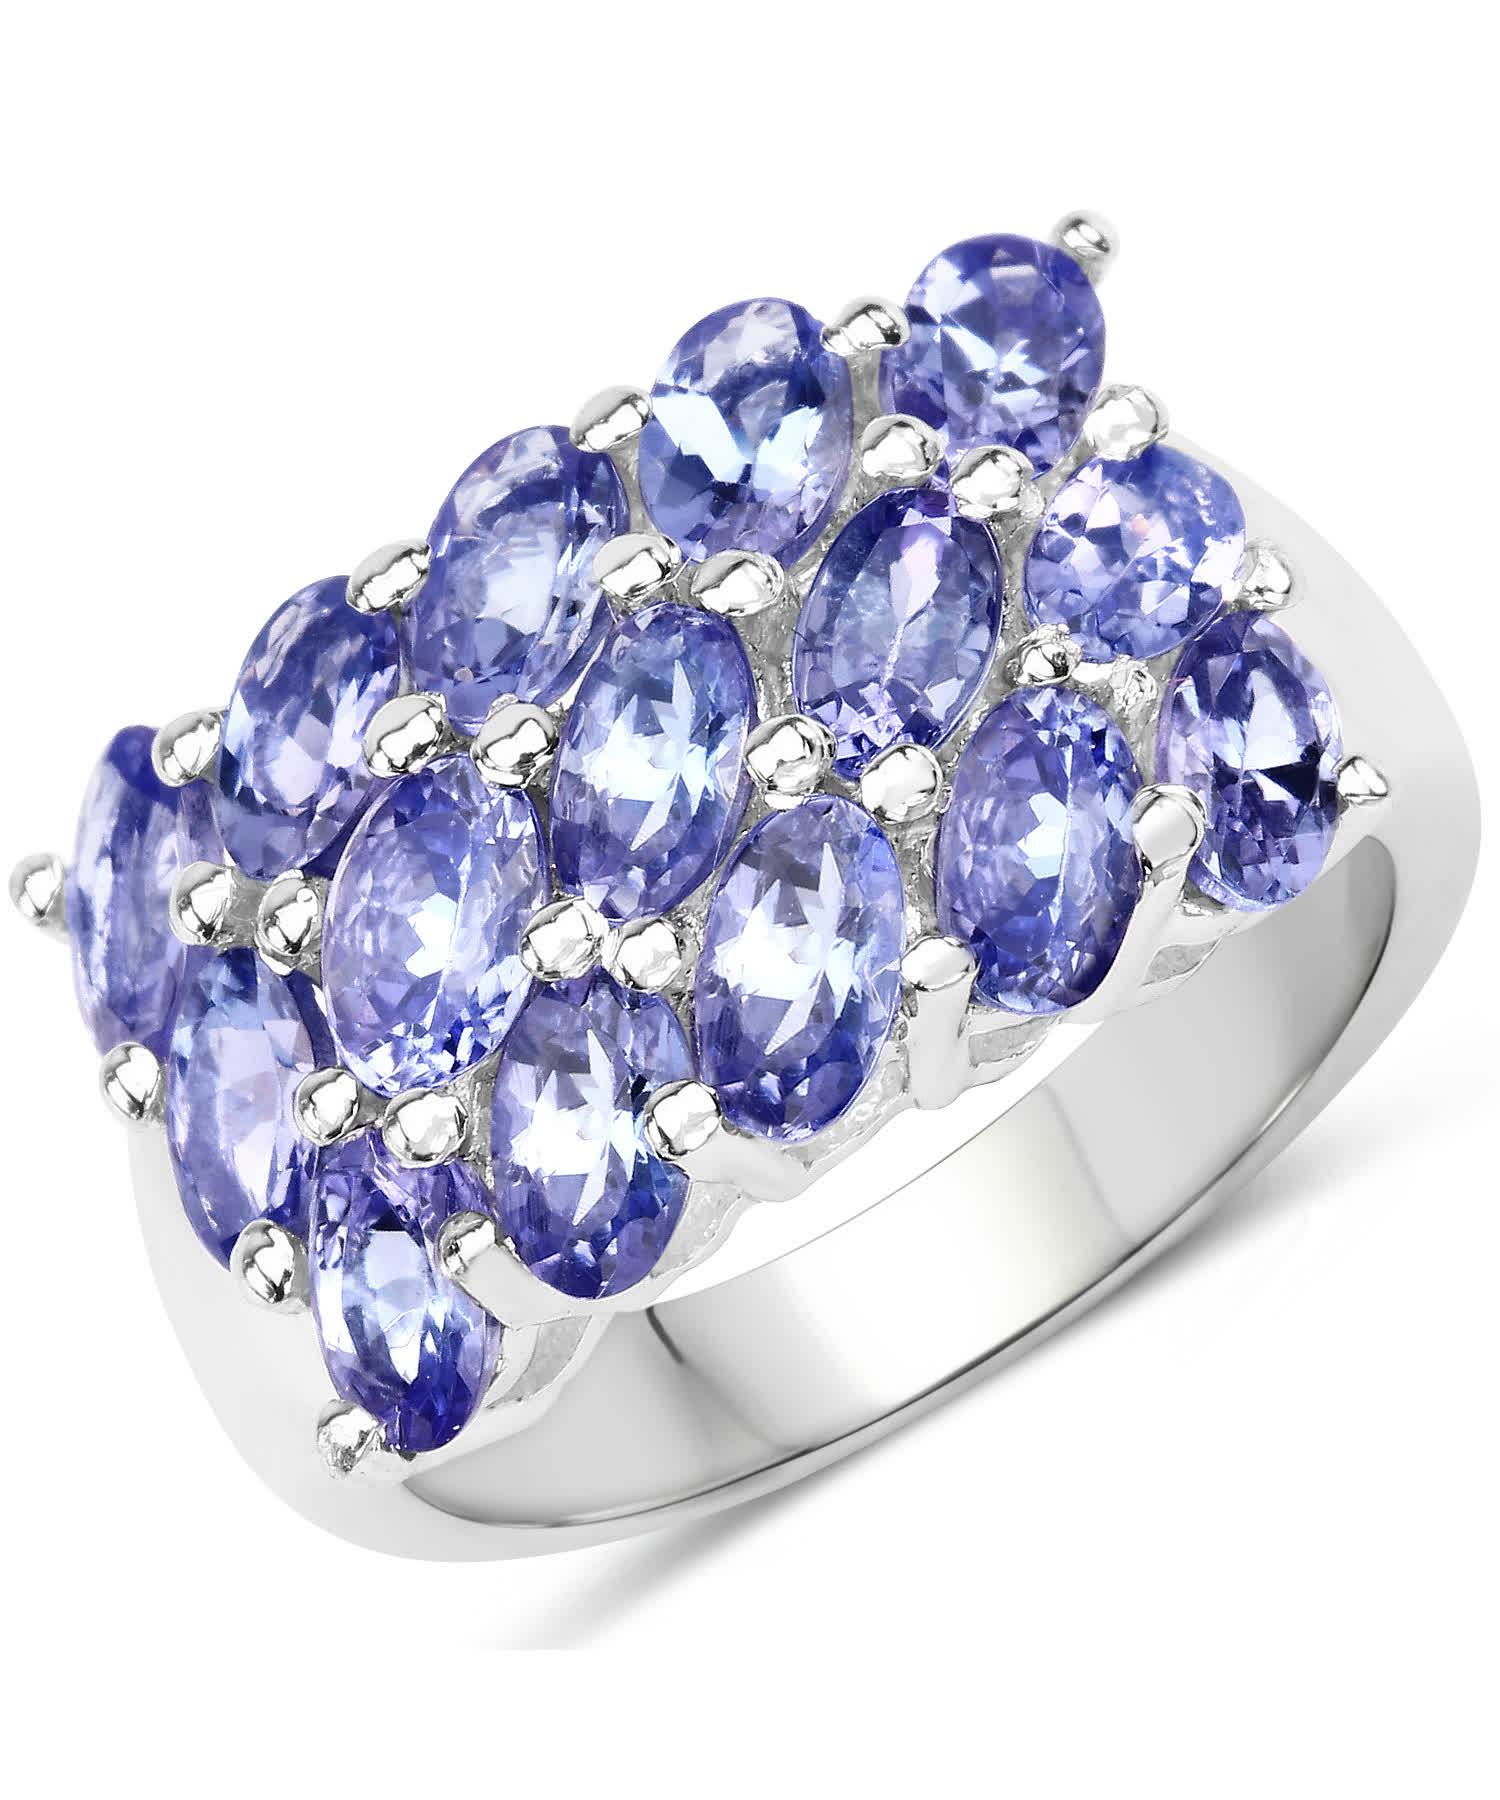 3.60ctw Natural Tanzanite Rhodium Plated 925 Sterling Silver Cocktail Ring View 1